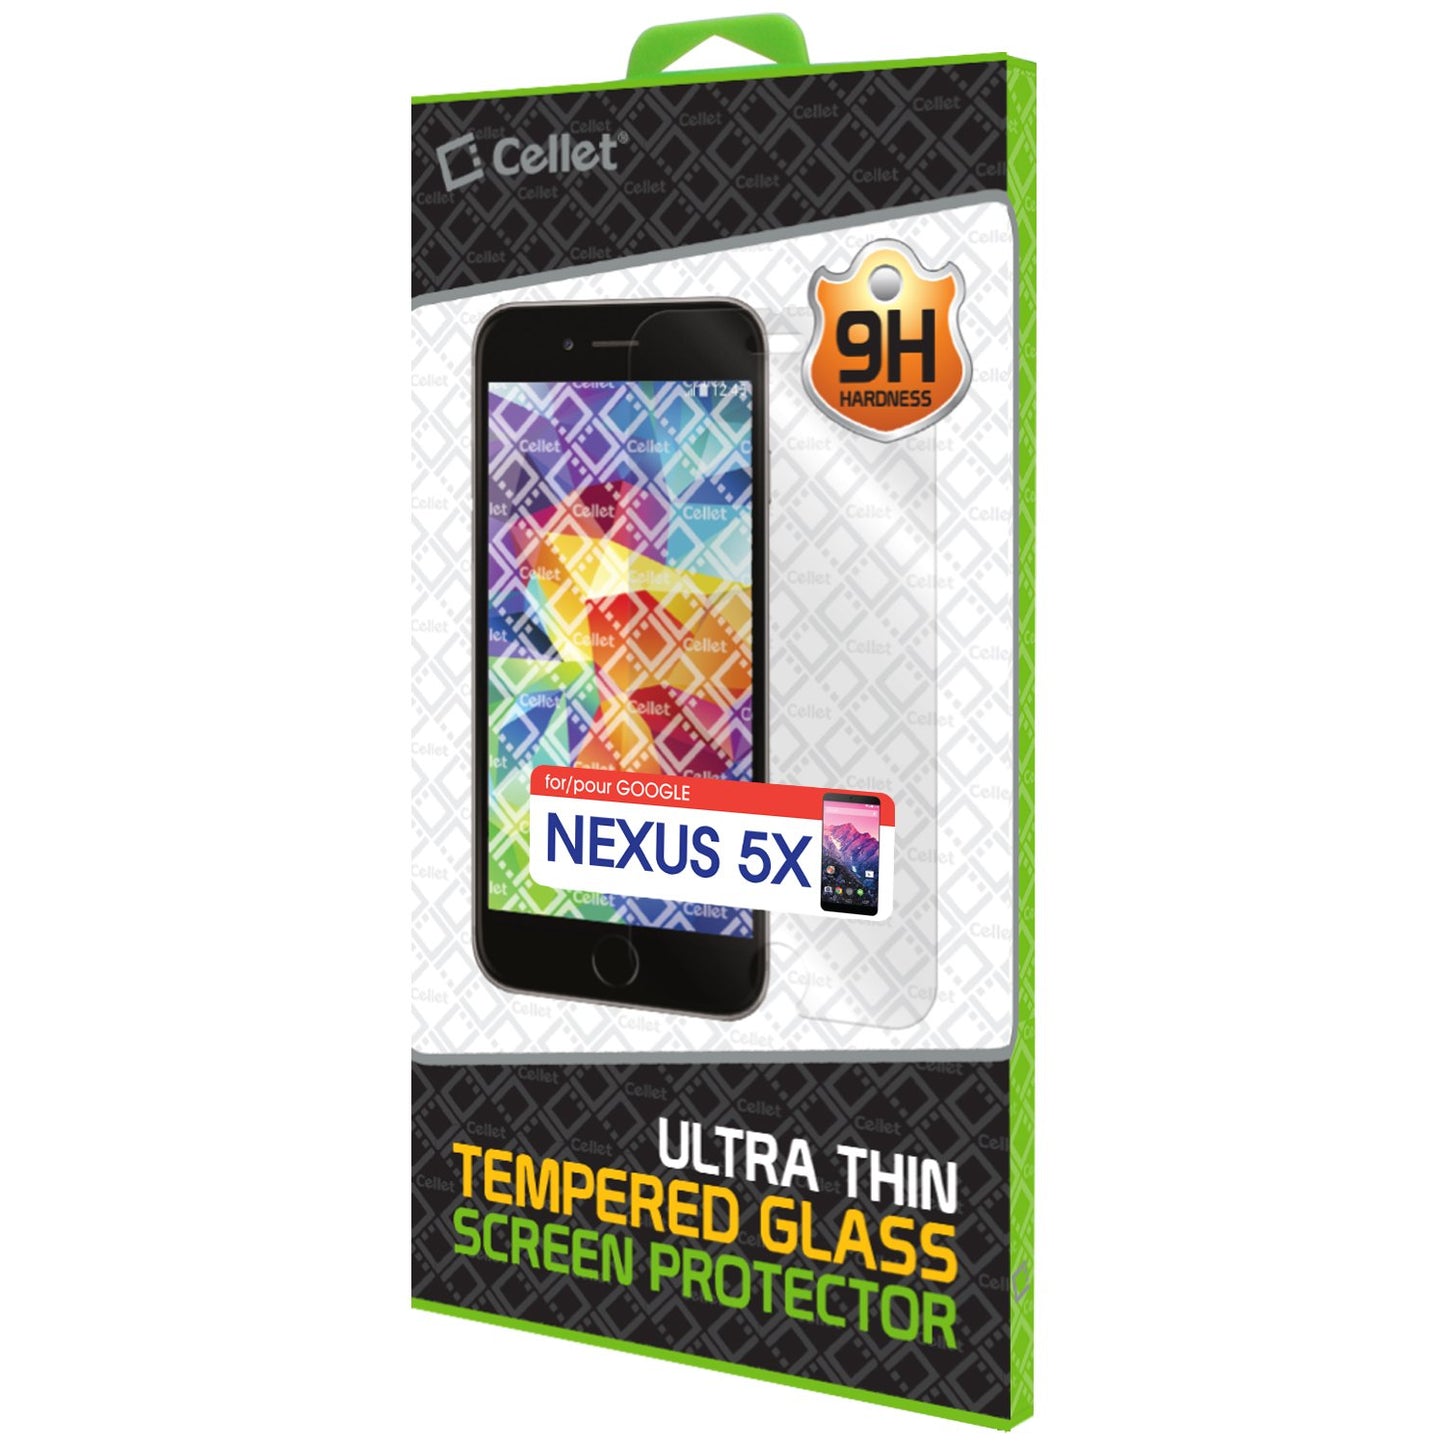 SGNEX5X - Cellet Premium Tempered Glass Screen Protector for Google Nexus 5X (0.3mm)